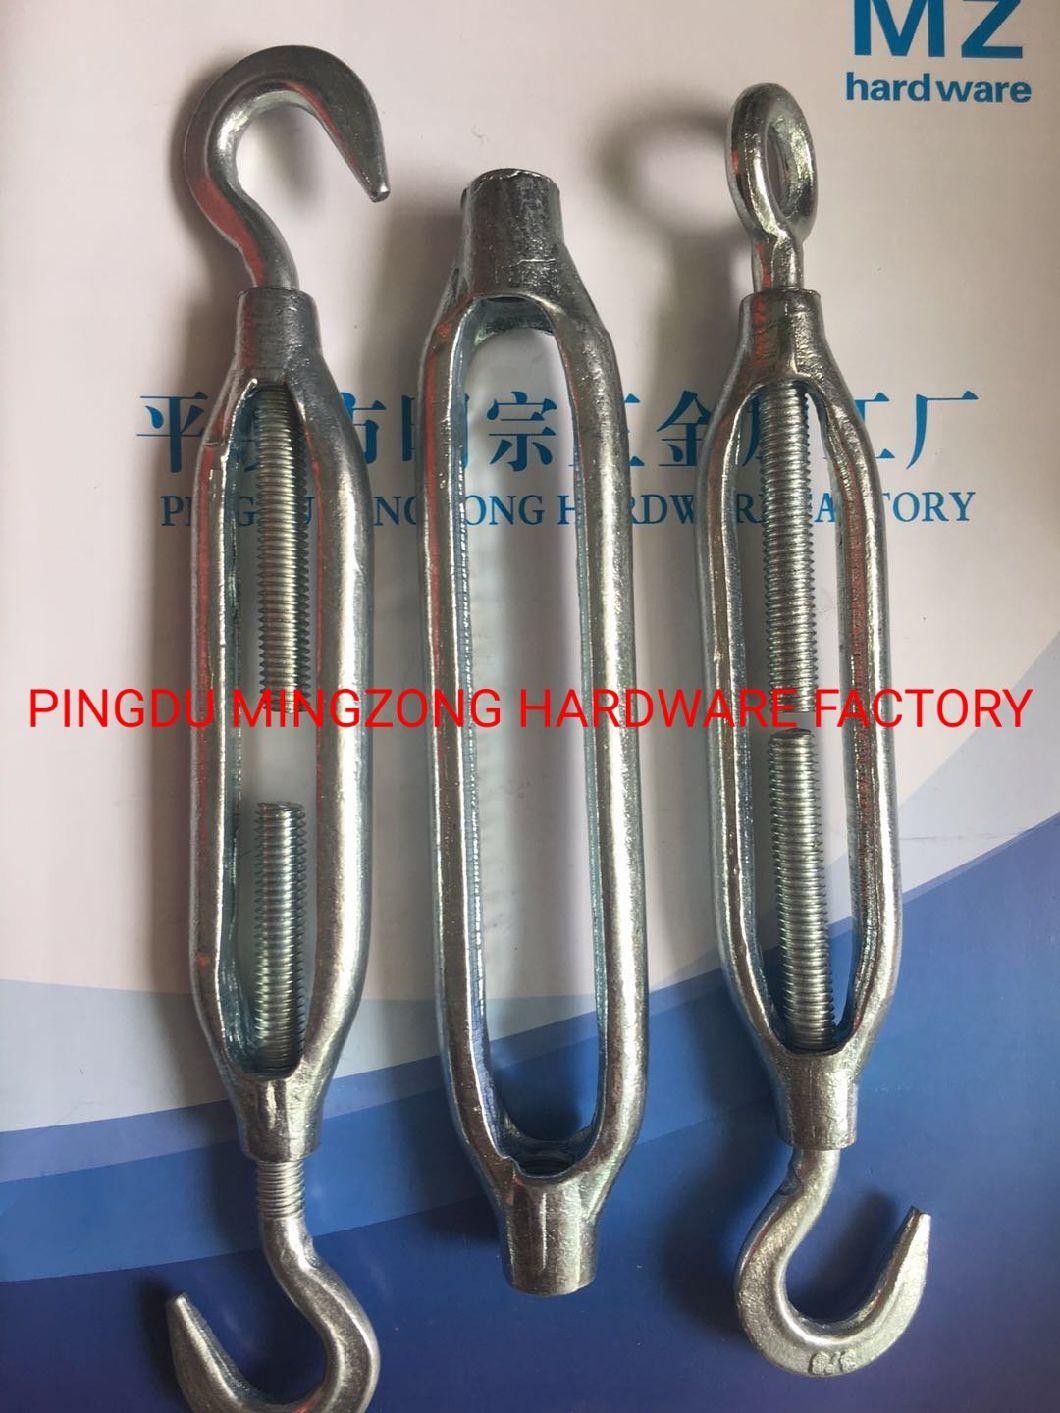 Turnbuckle, Rigging Turnbuckle, Forged Turnbuckle, Hardware Rigging Turnbuckle, Black Turnbuckle, Turnbuckle Screw, Concrete Turnbuckle